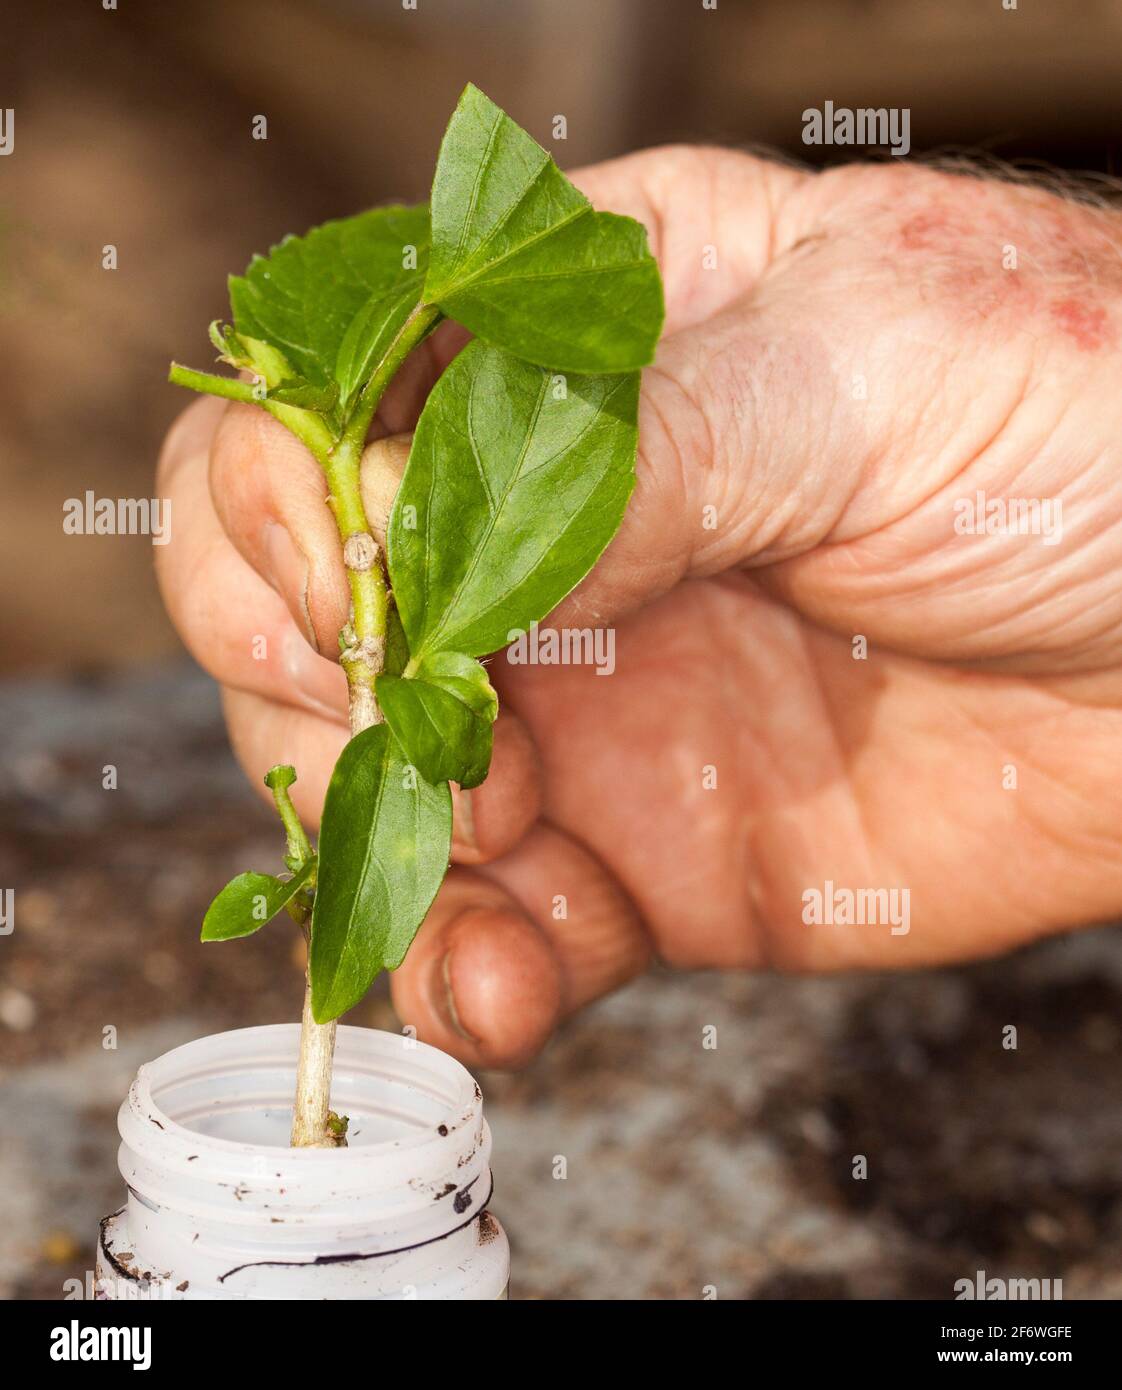 Hibiscus stem cutting held in a person's hand and being dipped into hormone rooting compound Stock Photo